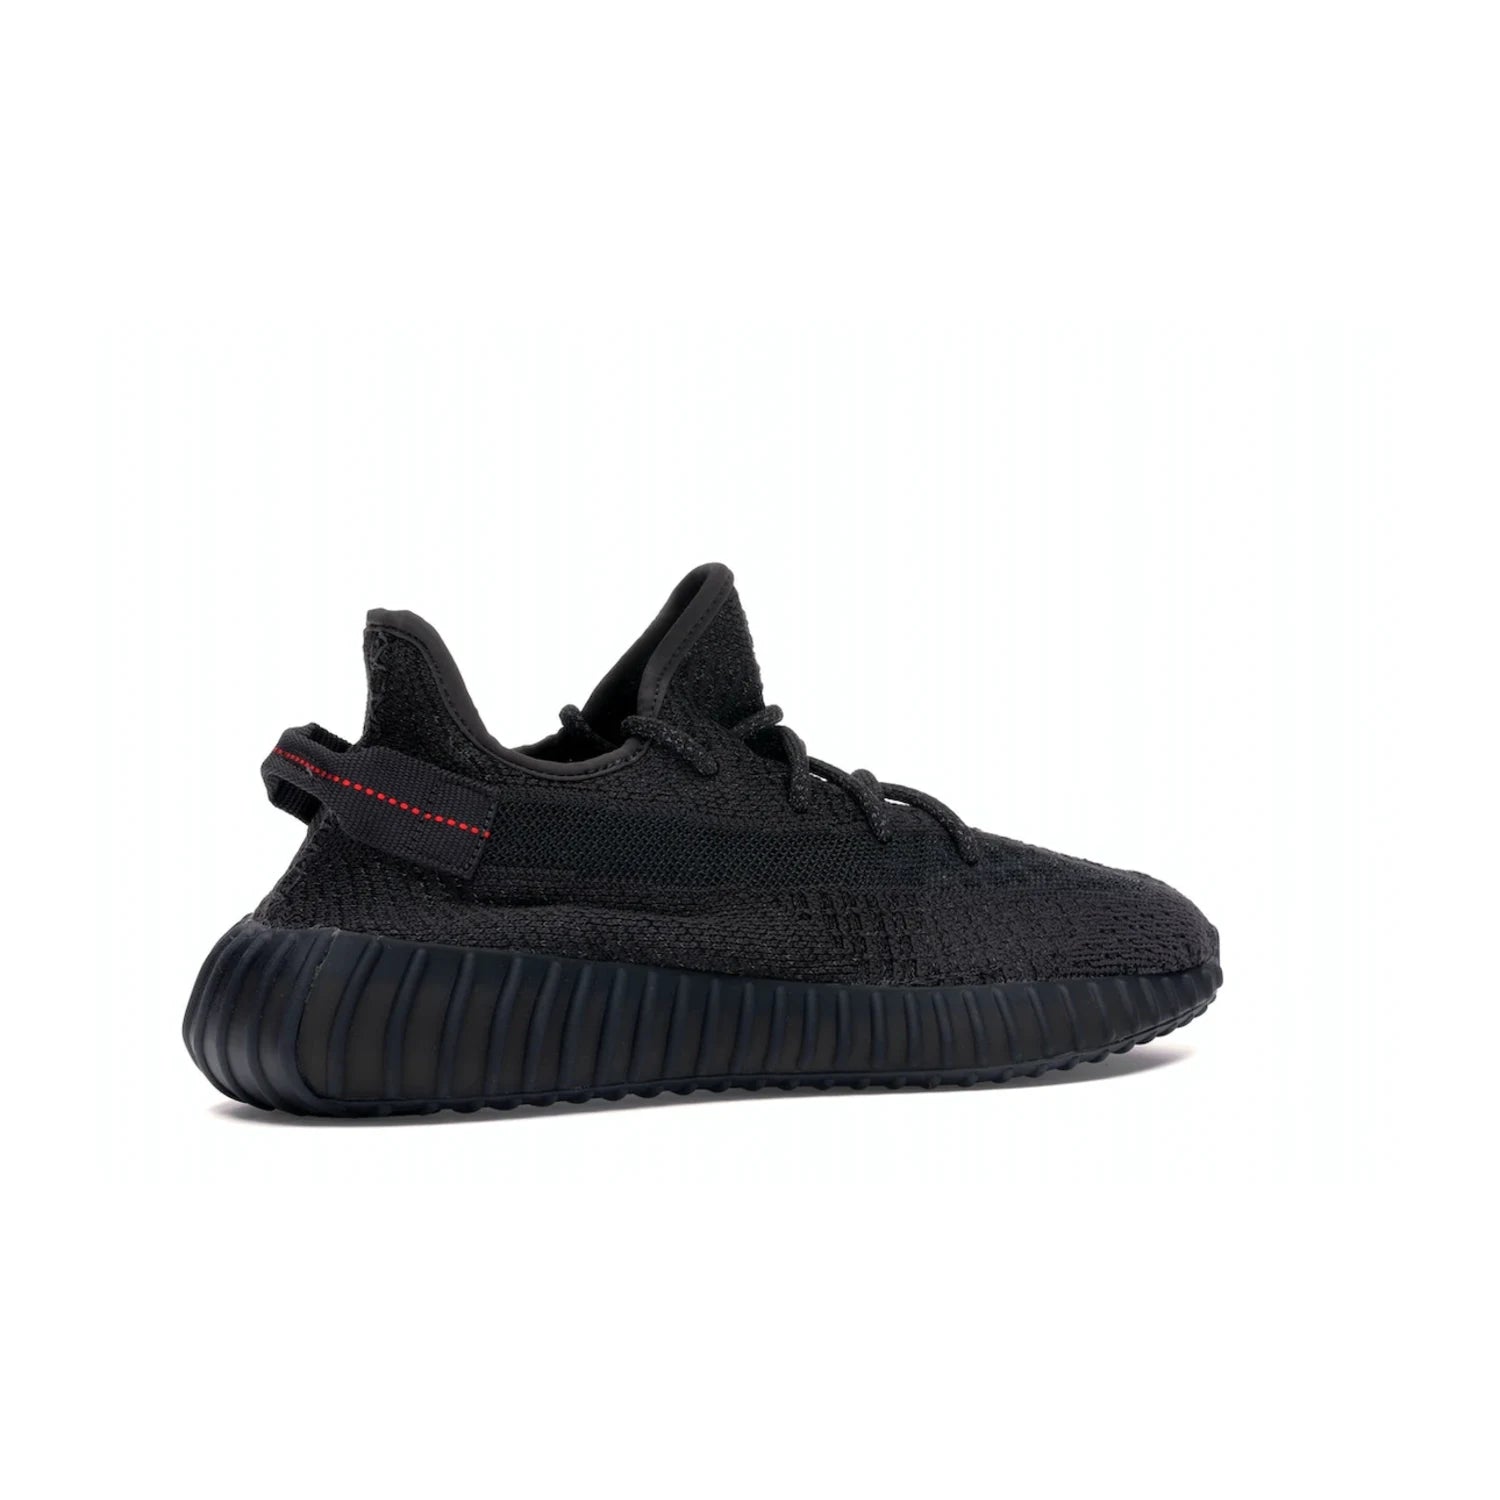 adidas Yeezy Boost 350 V2 Static Black (Reflective) - Image 34 - Only at www.BallersClubKickz.com - Make a statement with the adidas Yeezy Boost 350 V2 Static Black Reflective. All-black upper, reflective accents, midsole, and sole combine for a stylish look. High quality materials. June 2019 release. Add to your collection today.